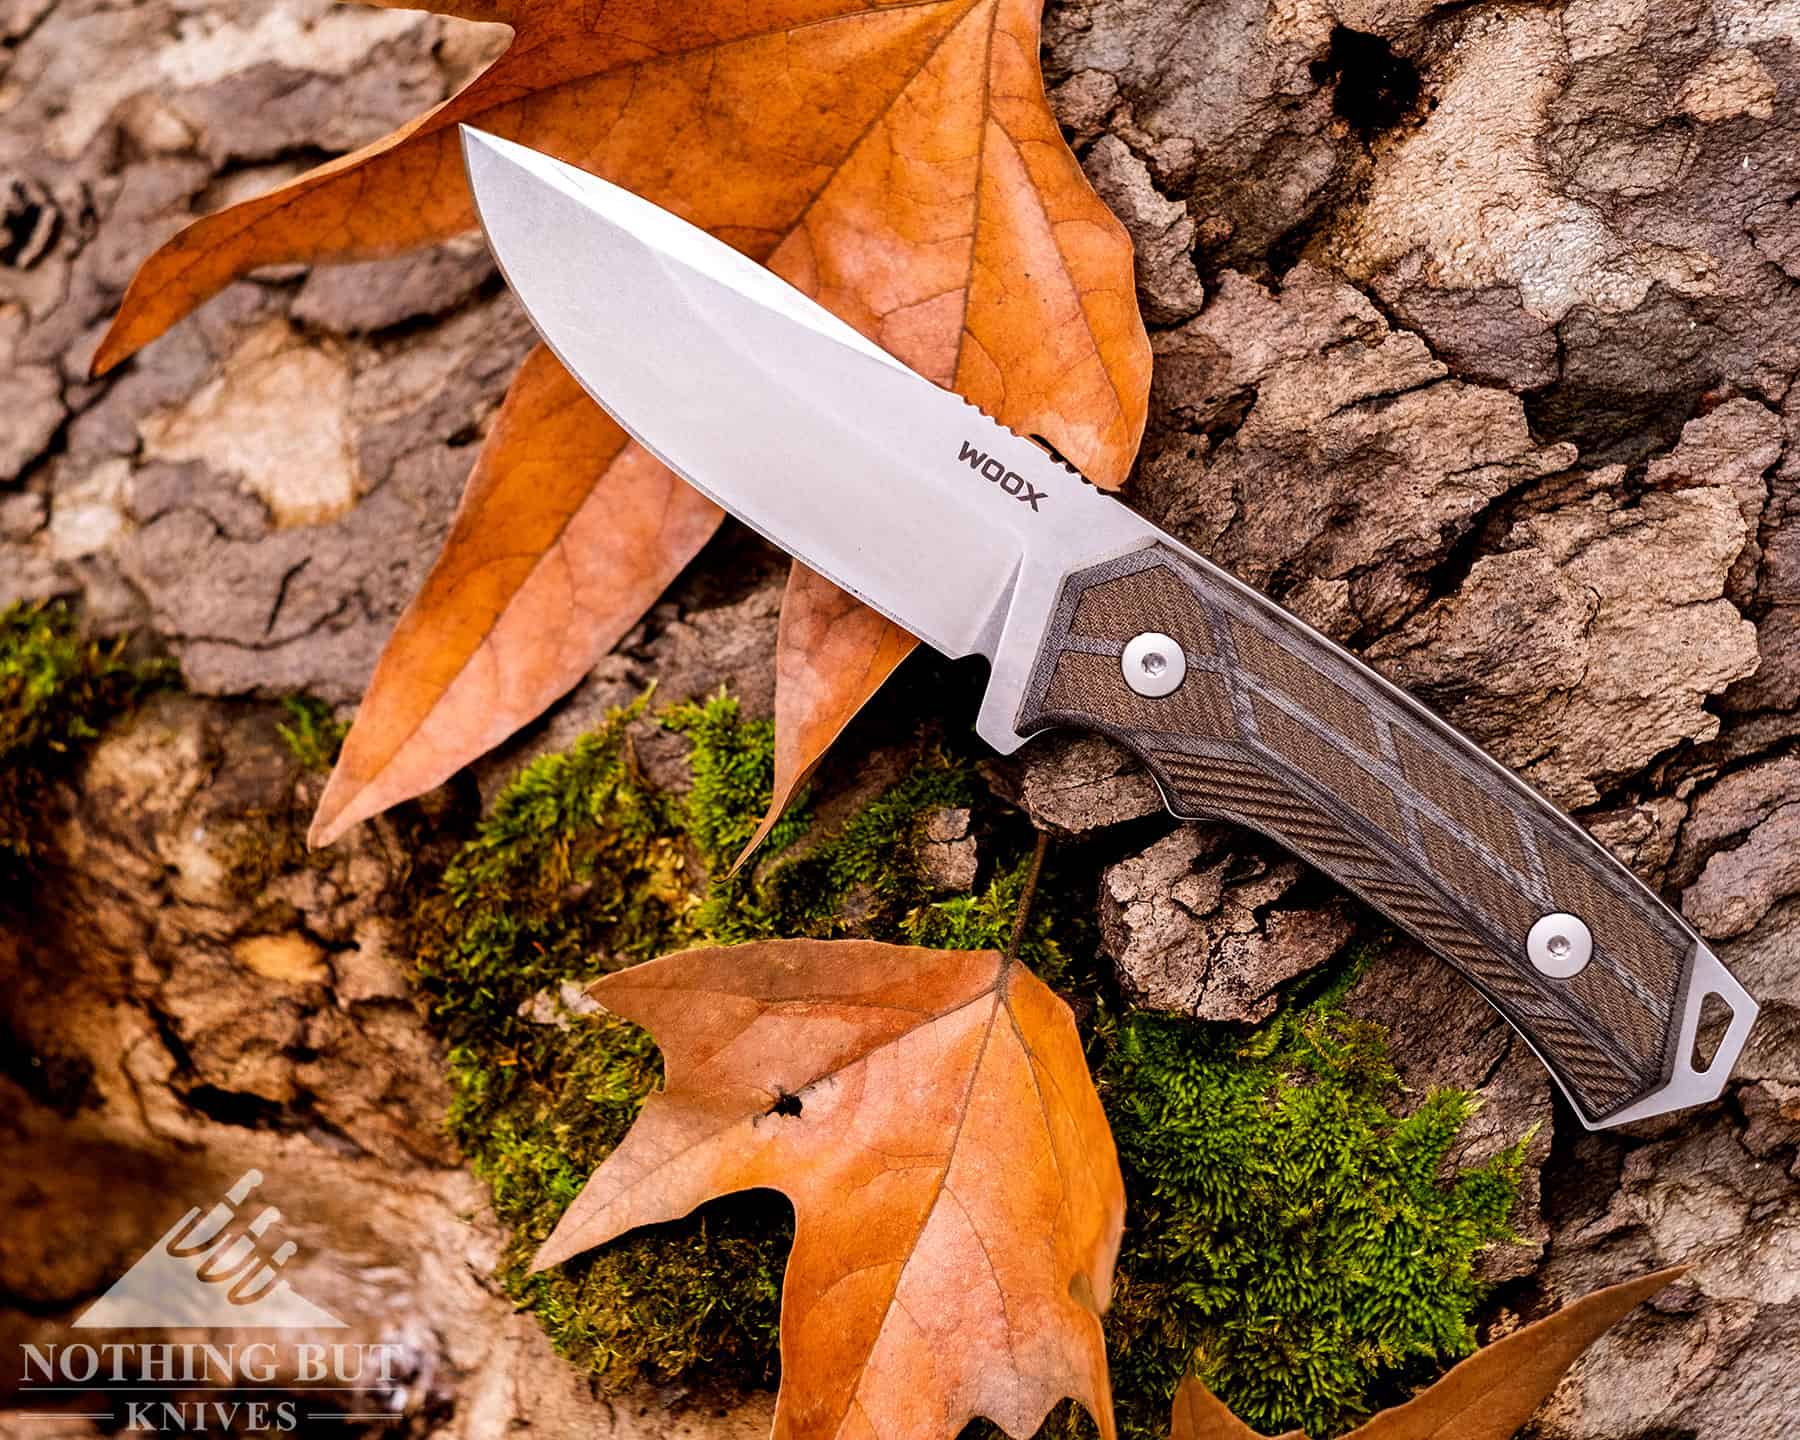 The Woox 63 is an excellent survival knife. 